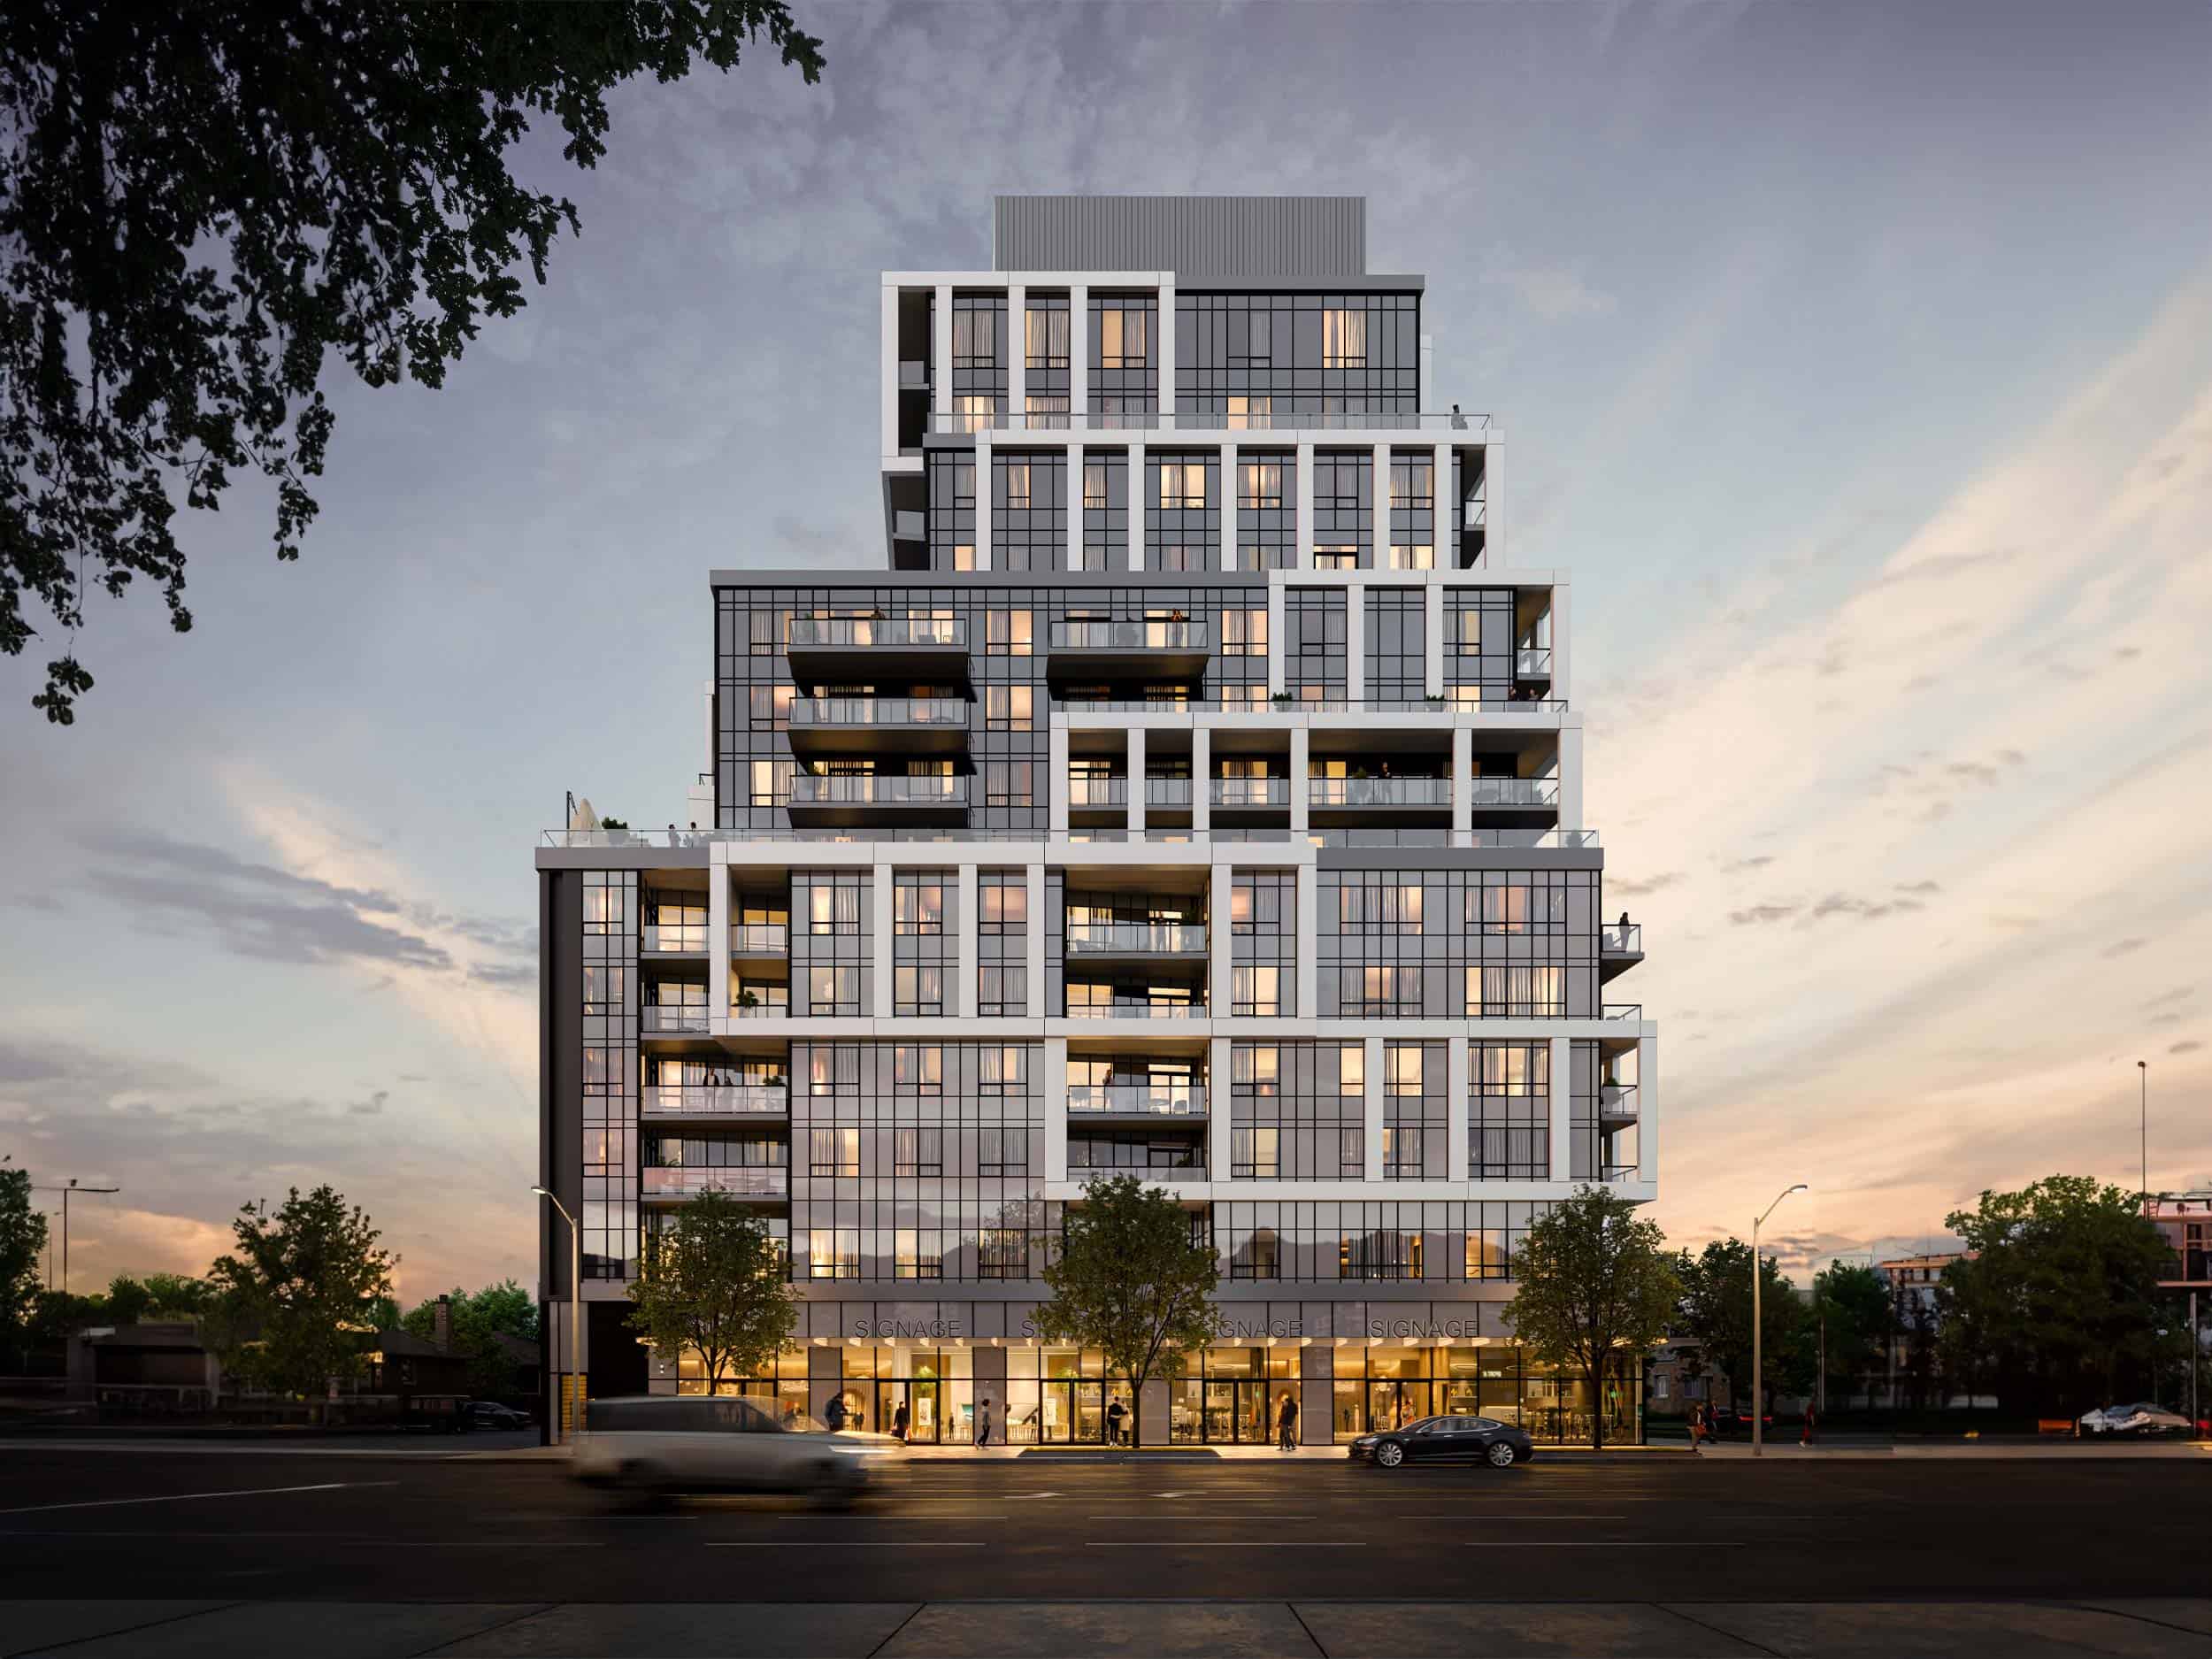 6080 Yonge by Tridel in North York